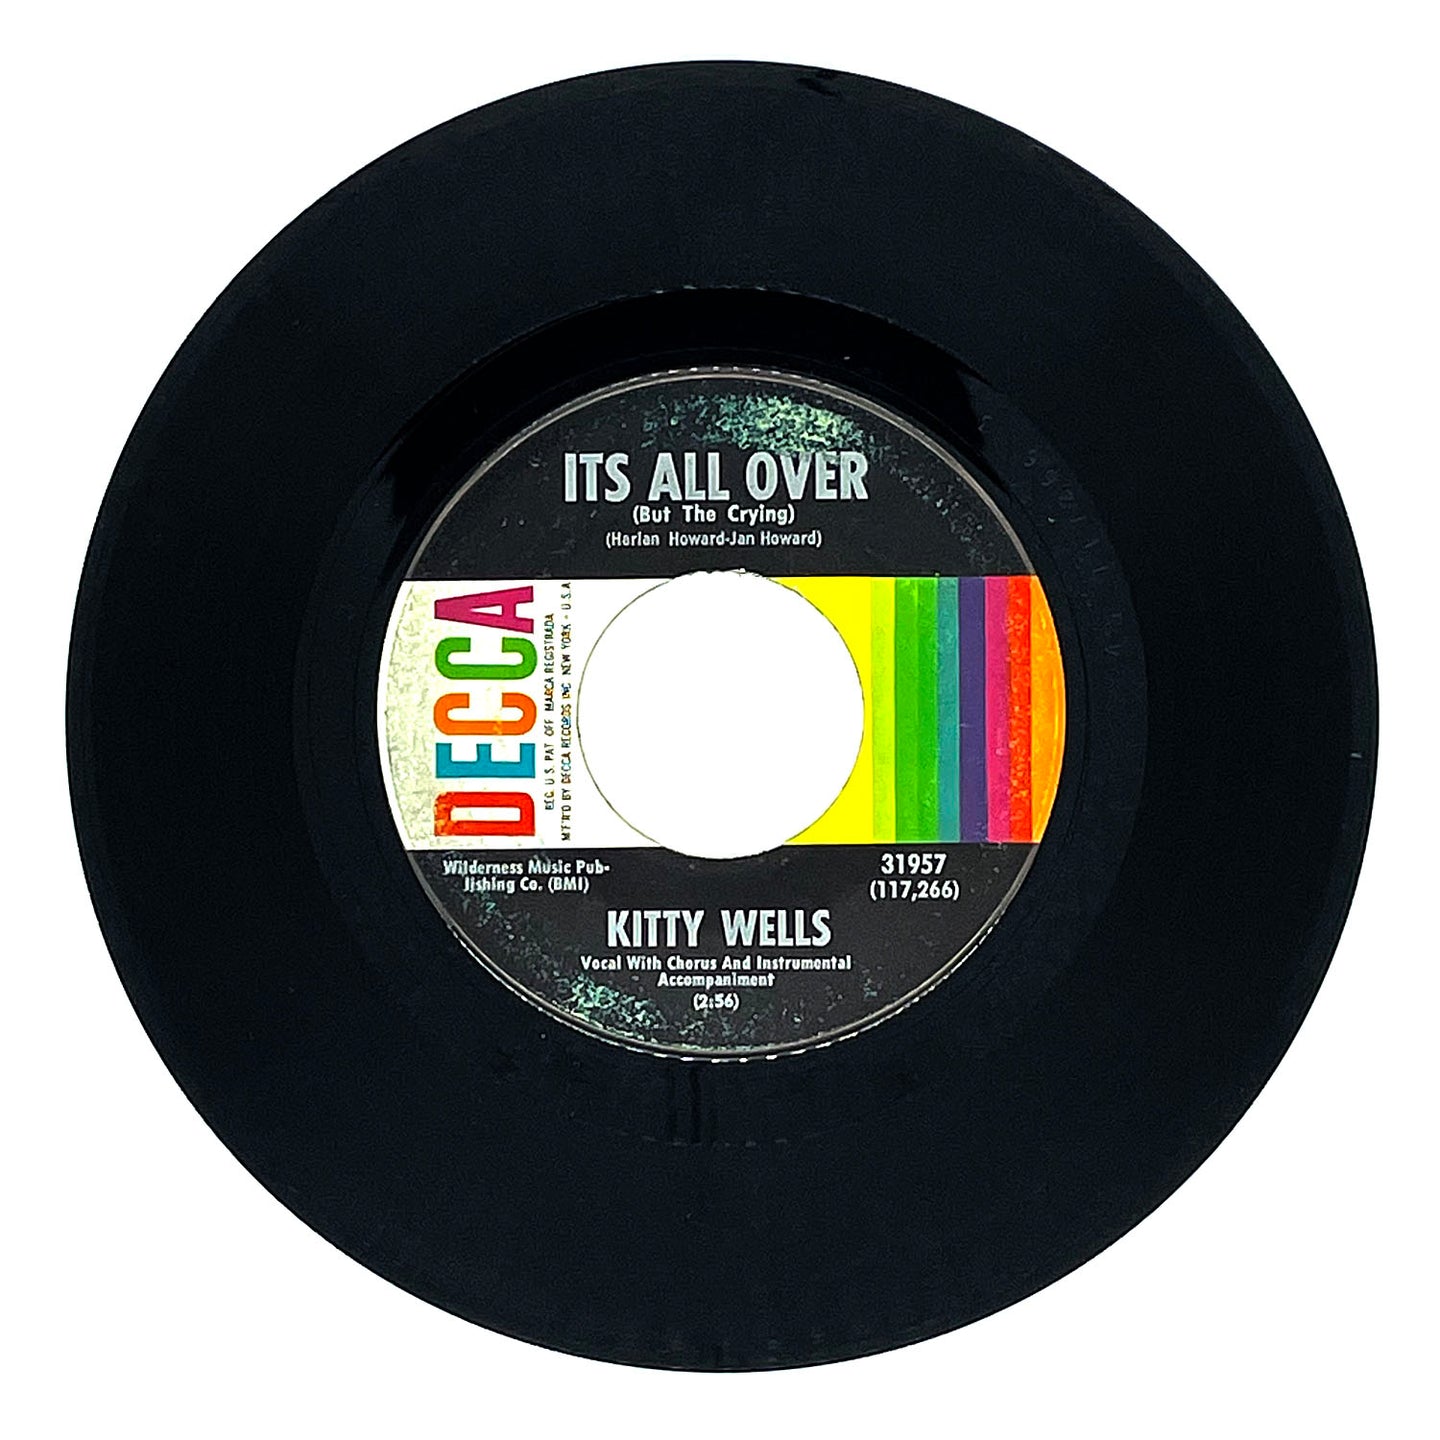 Kitty Wells : IT'S ALL OVER (BUT THE CRYING)/ YOU LEFT YOUR MARK ON ME